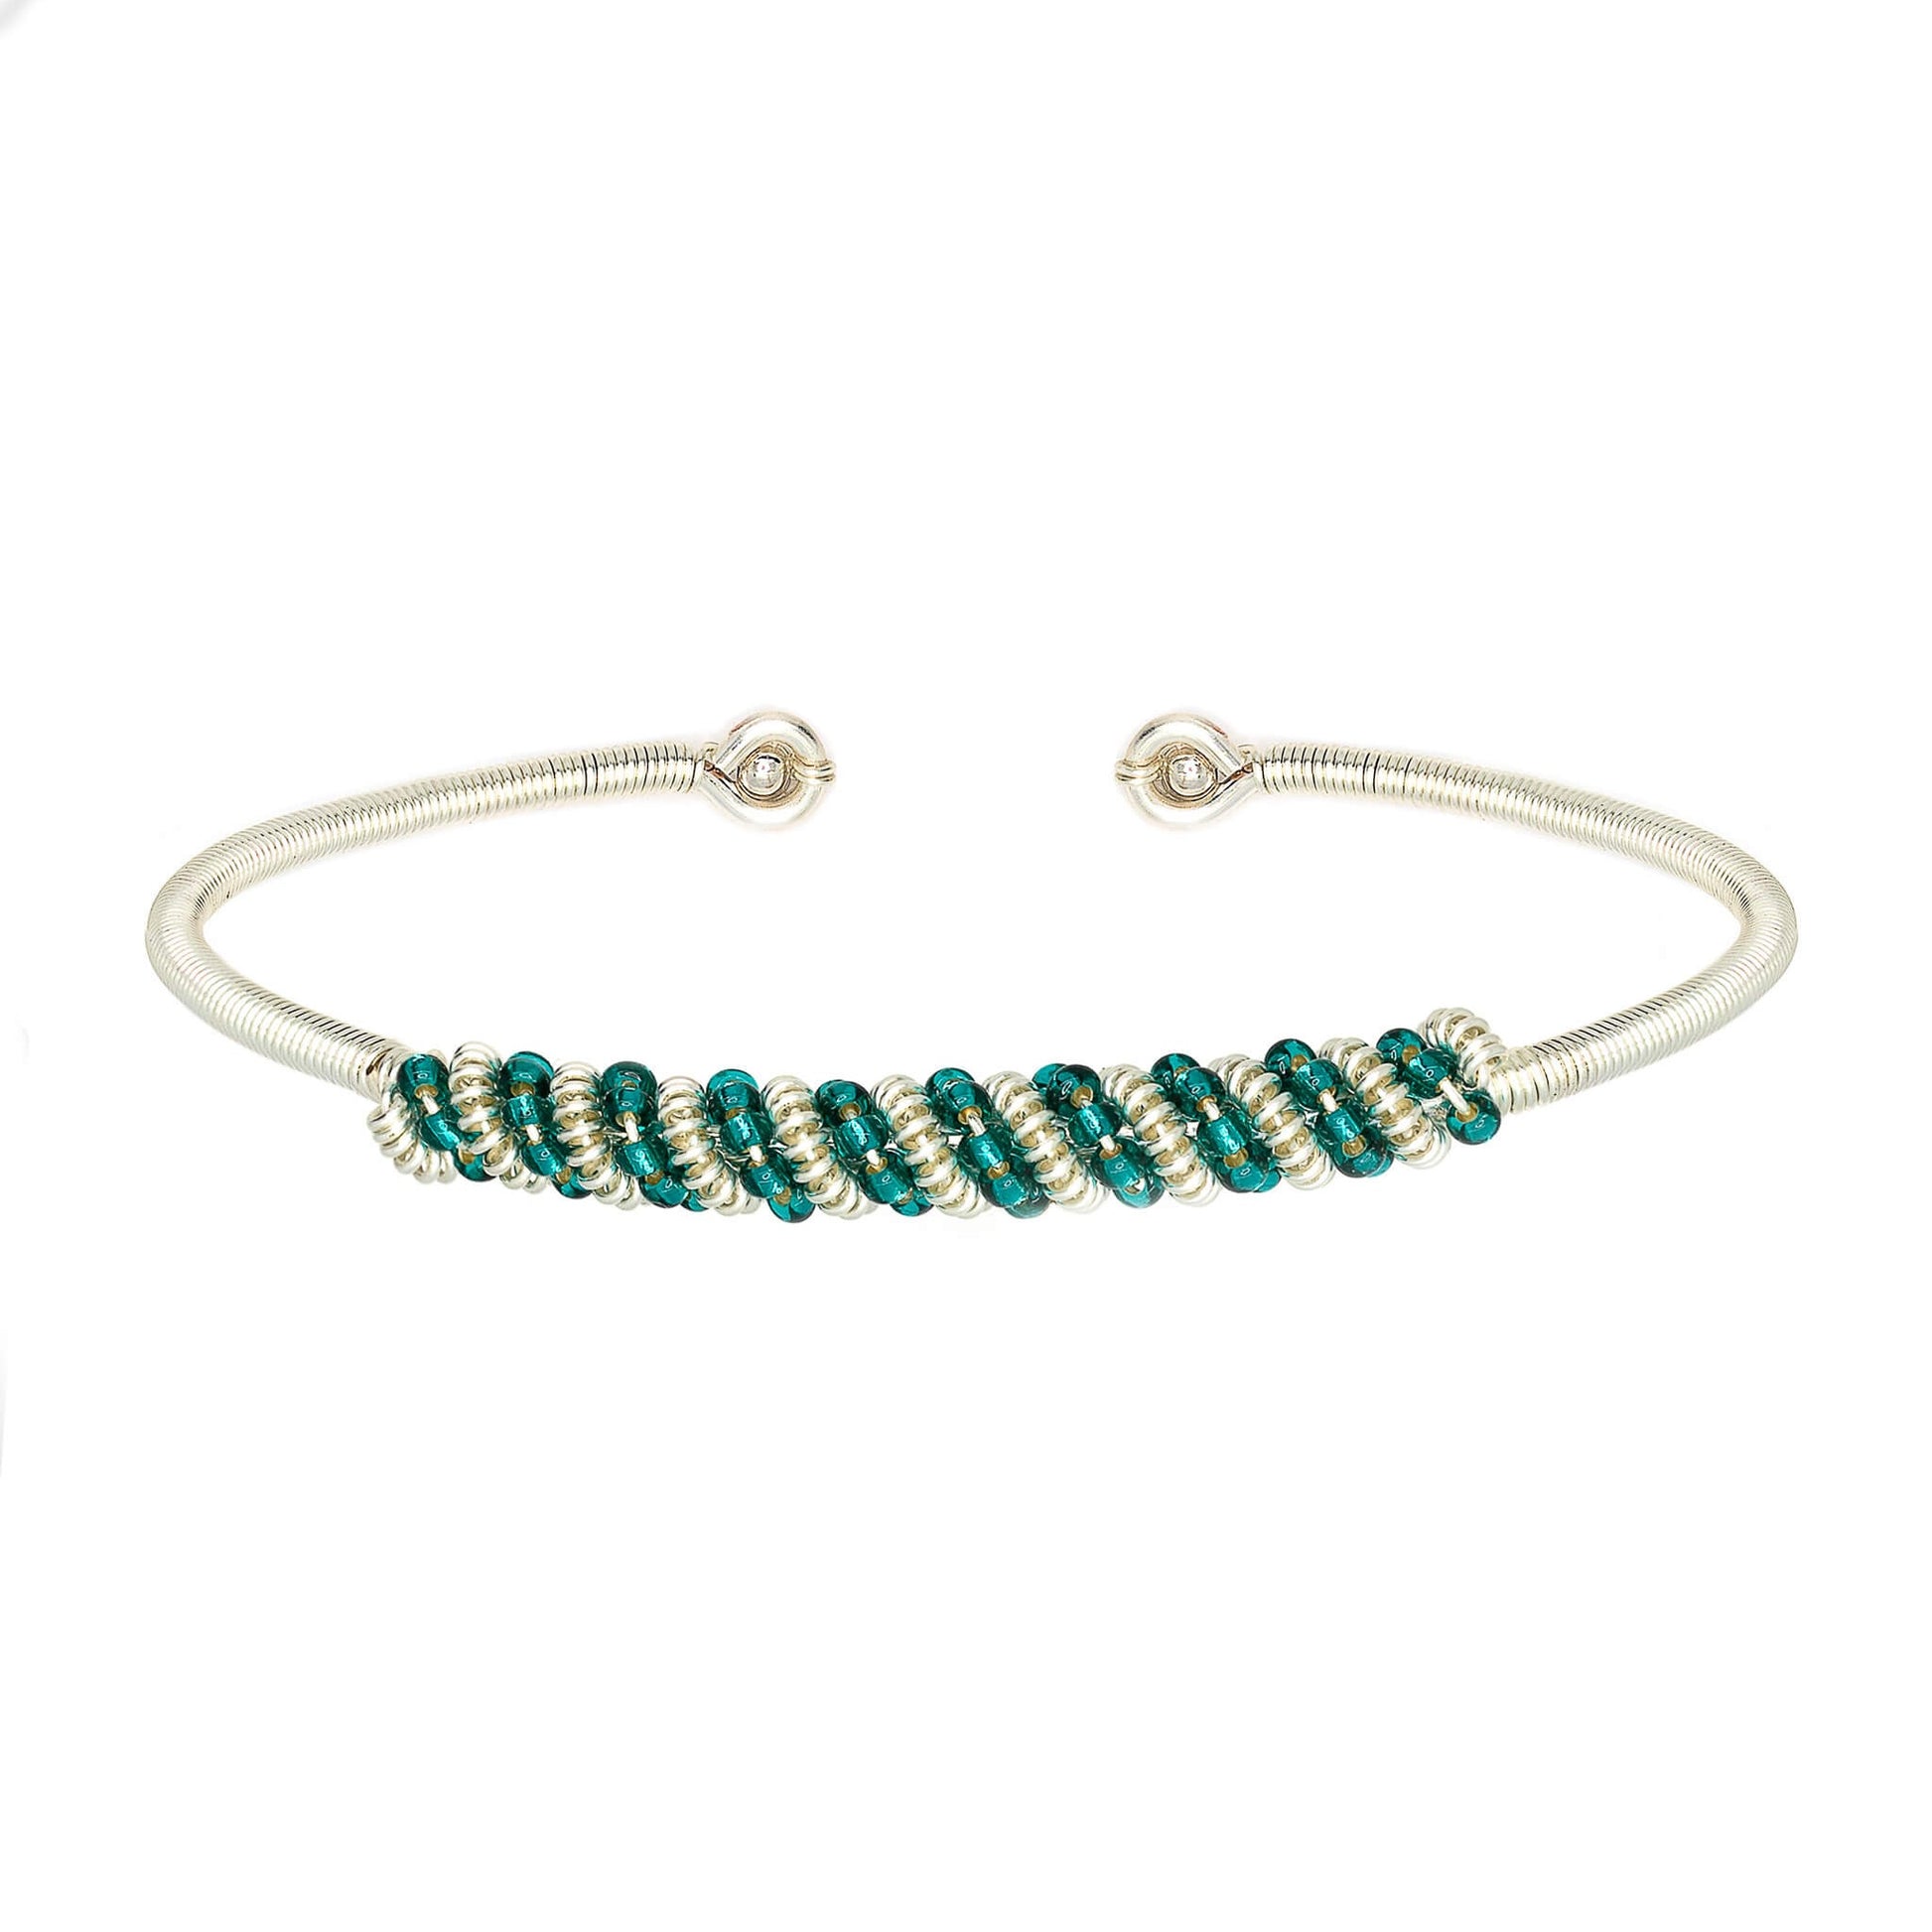 Siegen Bracelet is one size fits all. Silver and green bracelet. Handmade with Non-tarnish silver wire and Czech seed beads crystals. Wire-wrapped beaded bracelet.